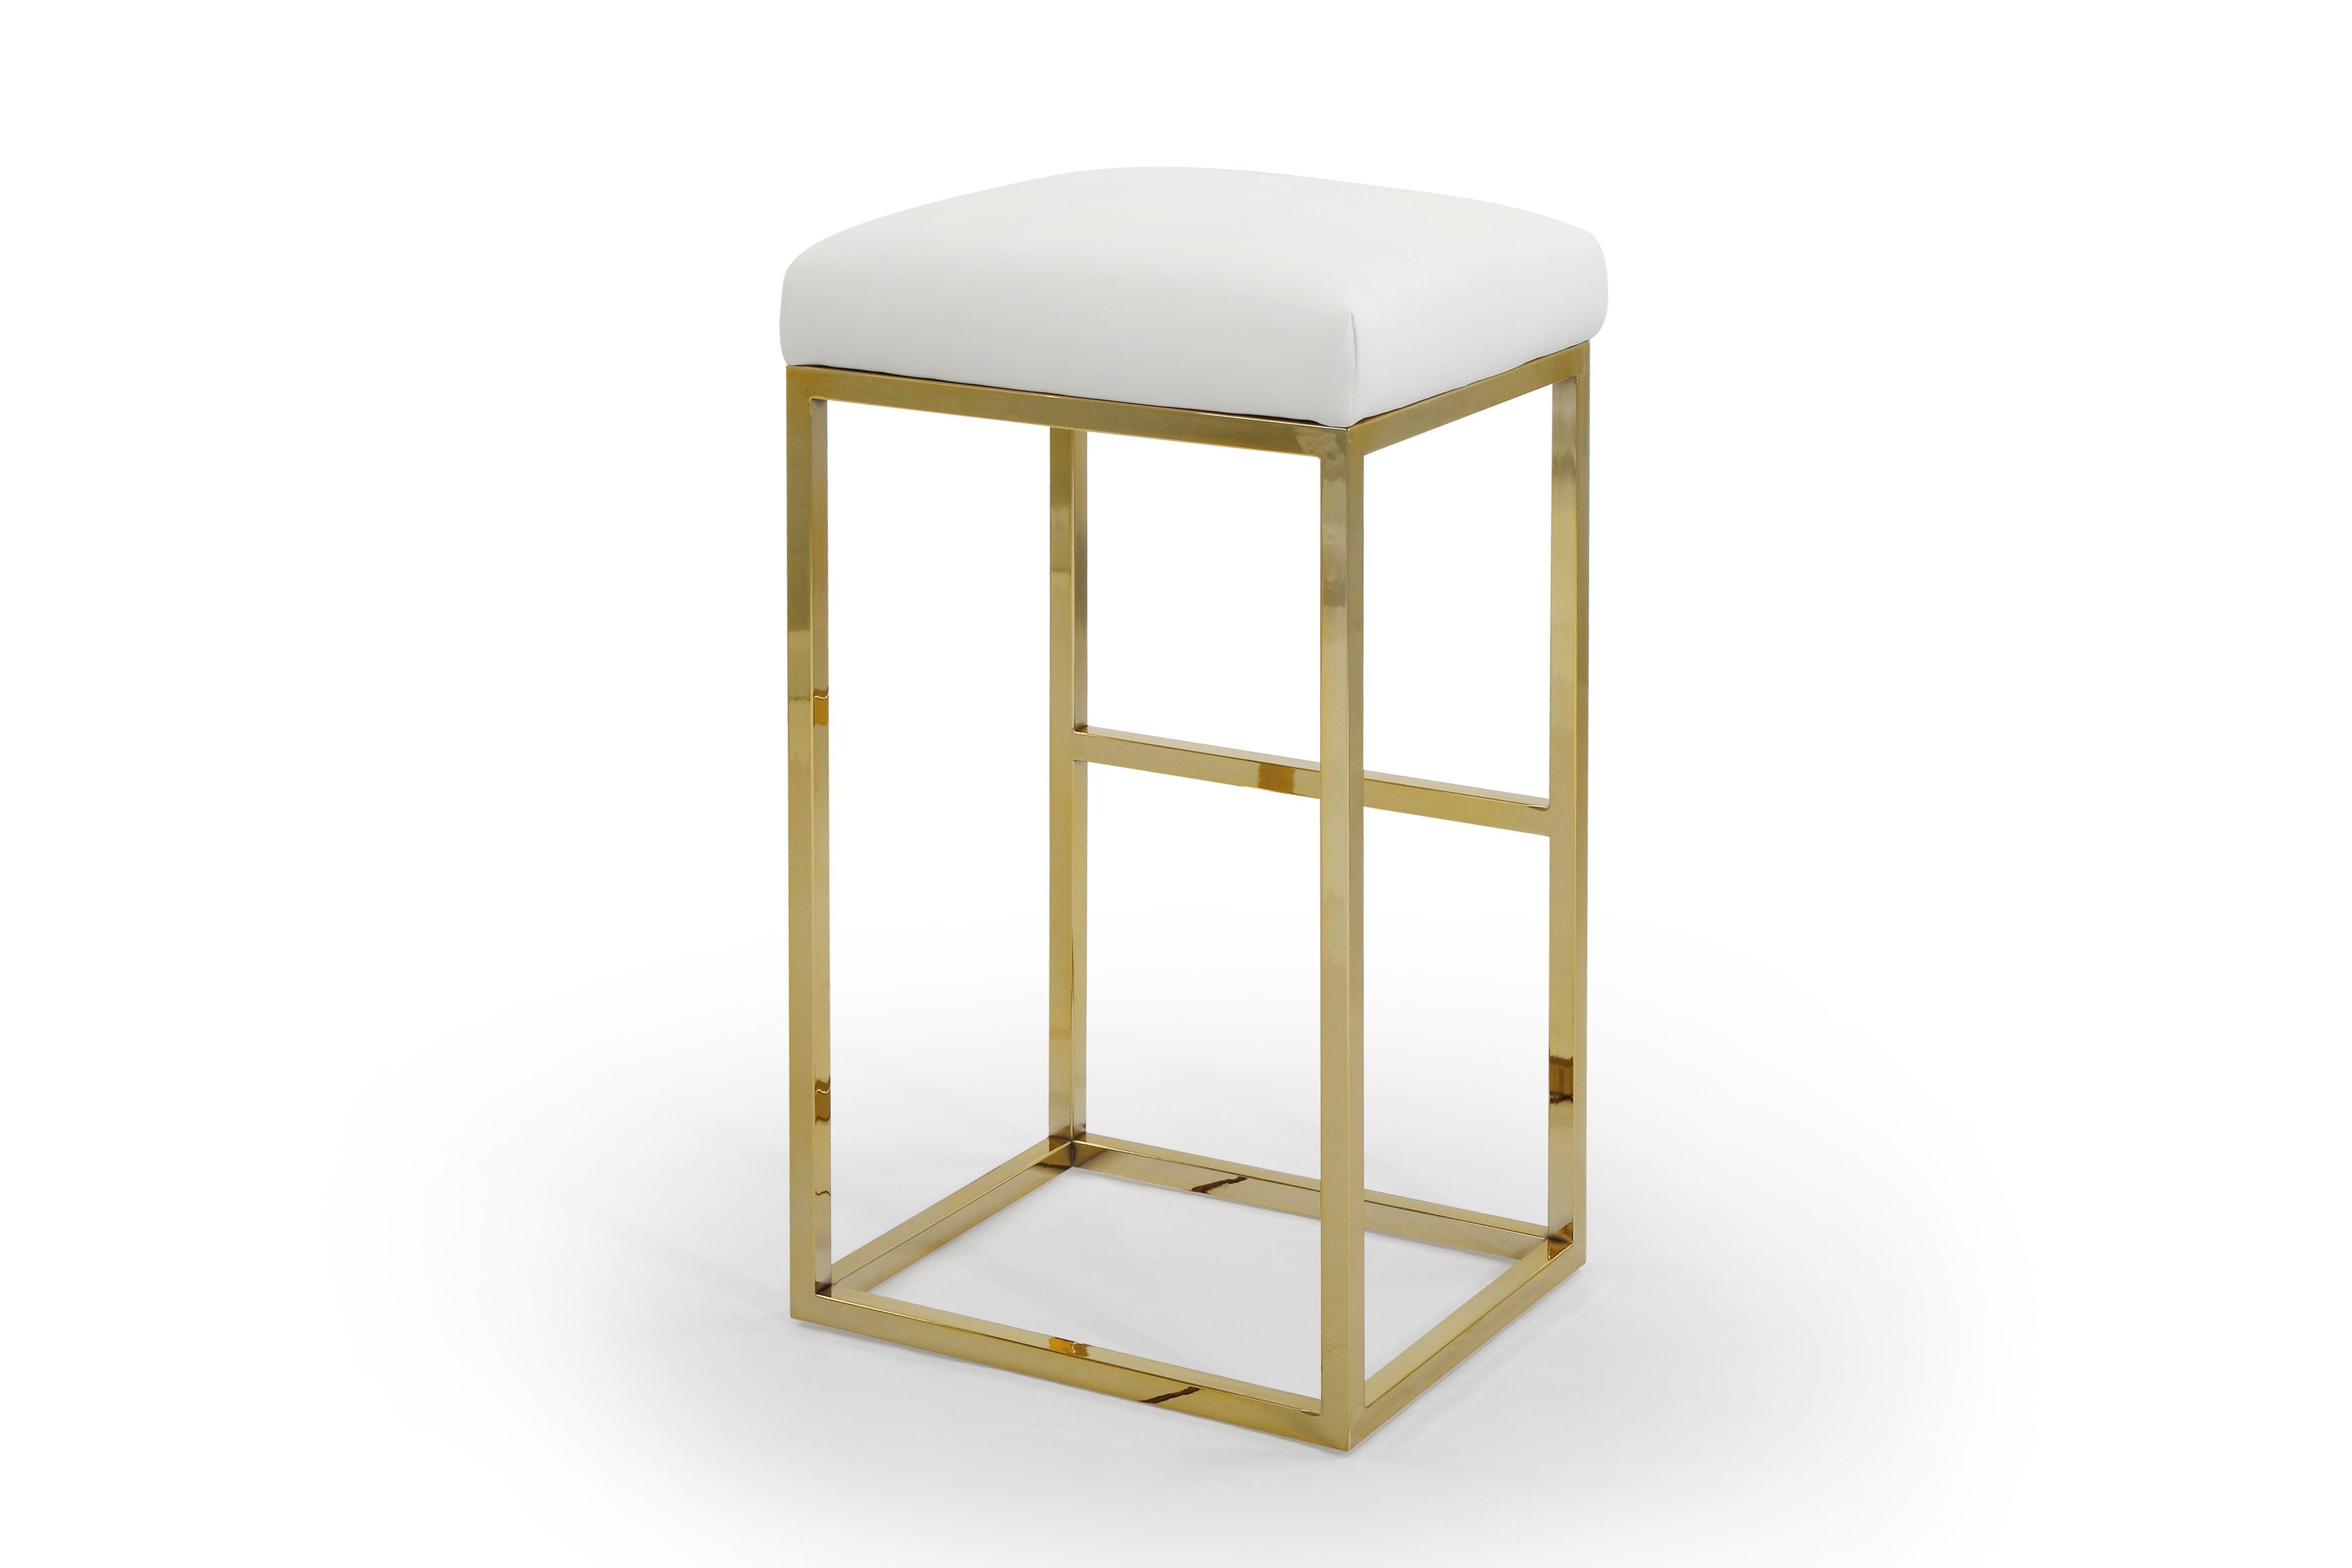 Valerie Faux Leather Bar Stool Chair Gold Base